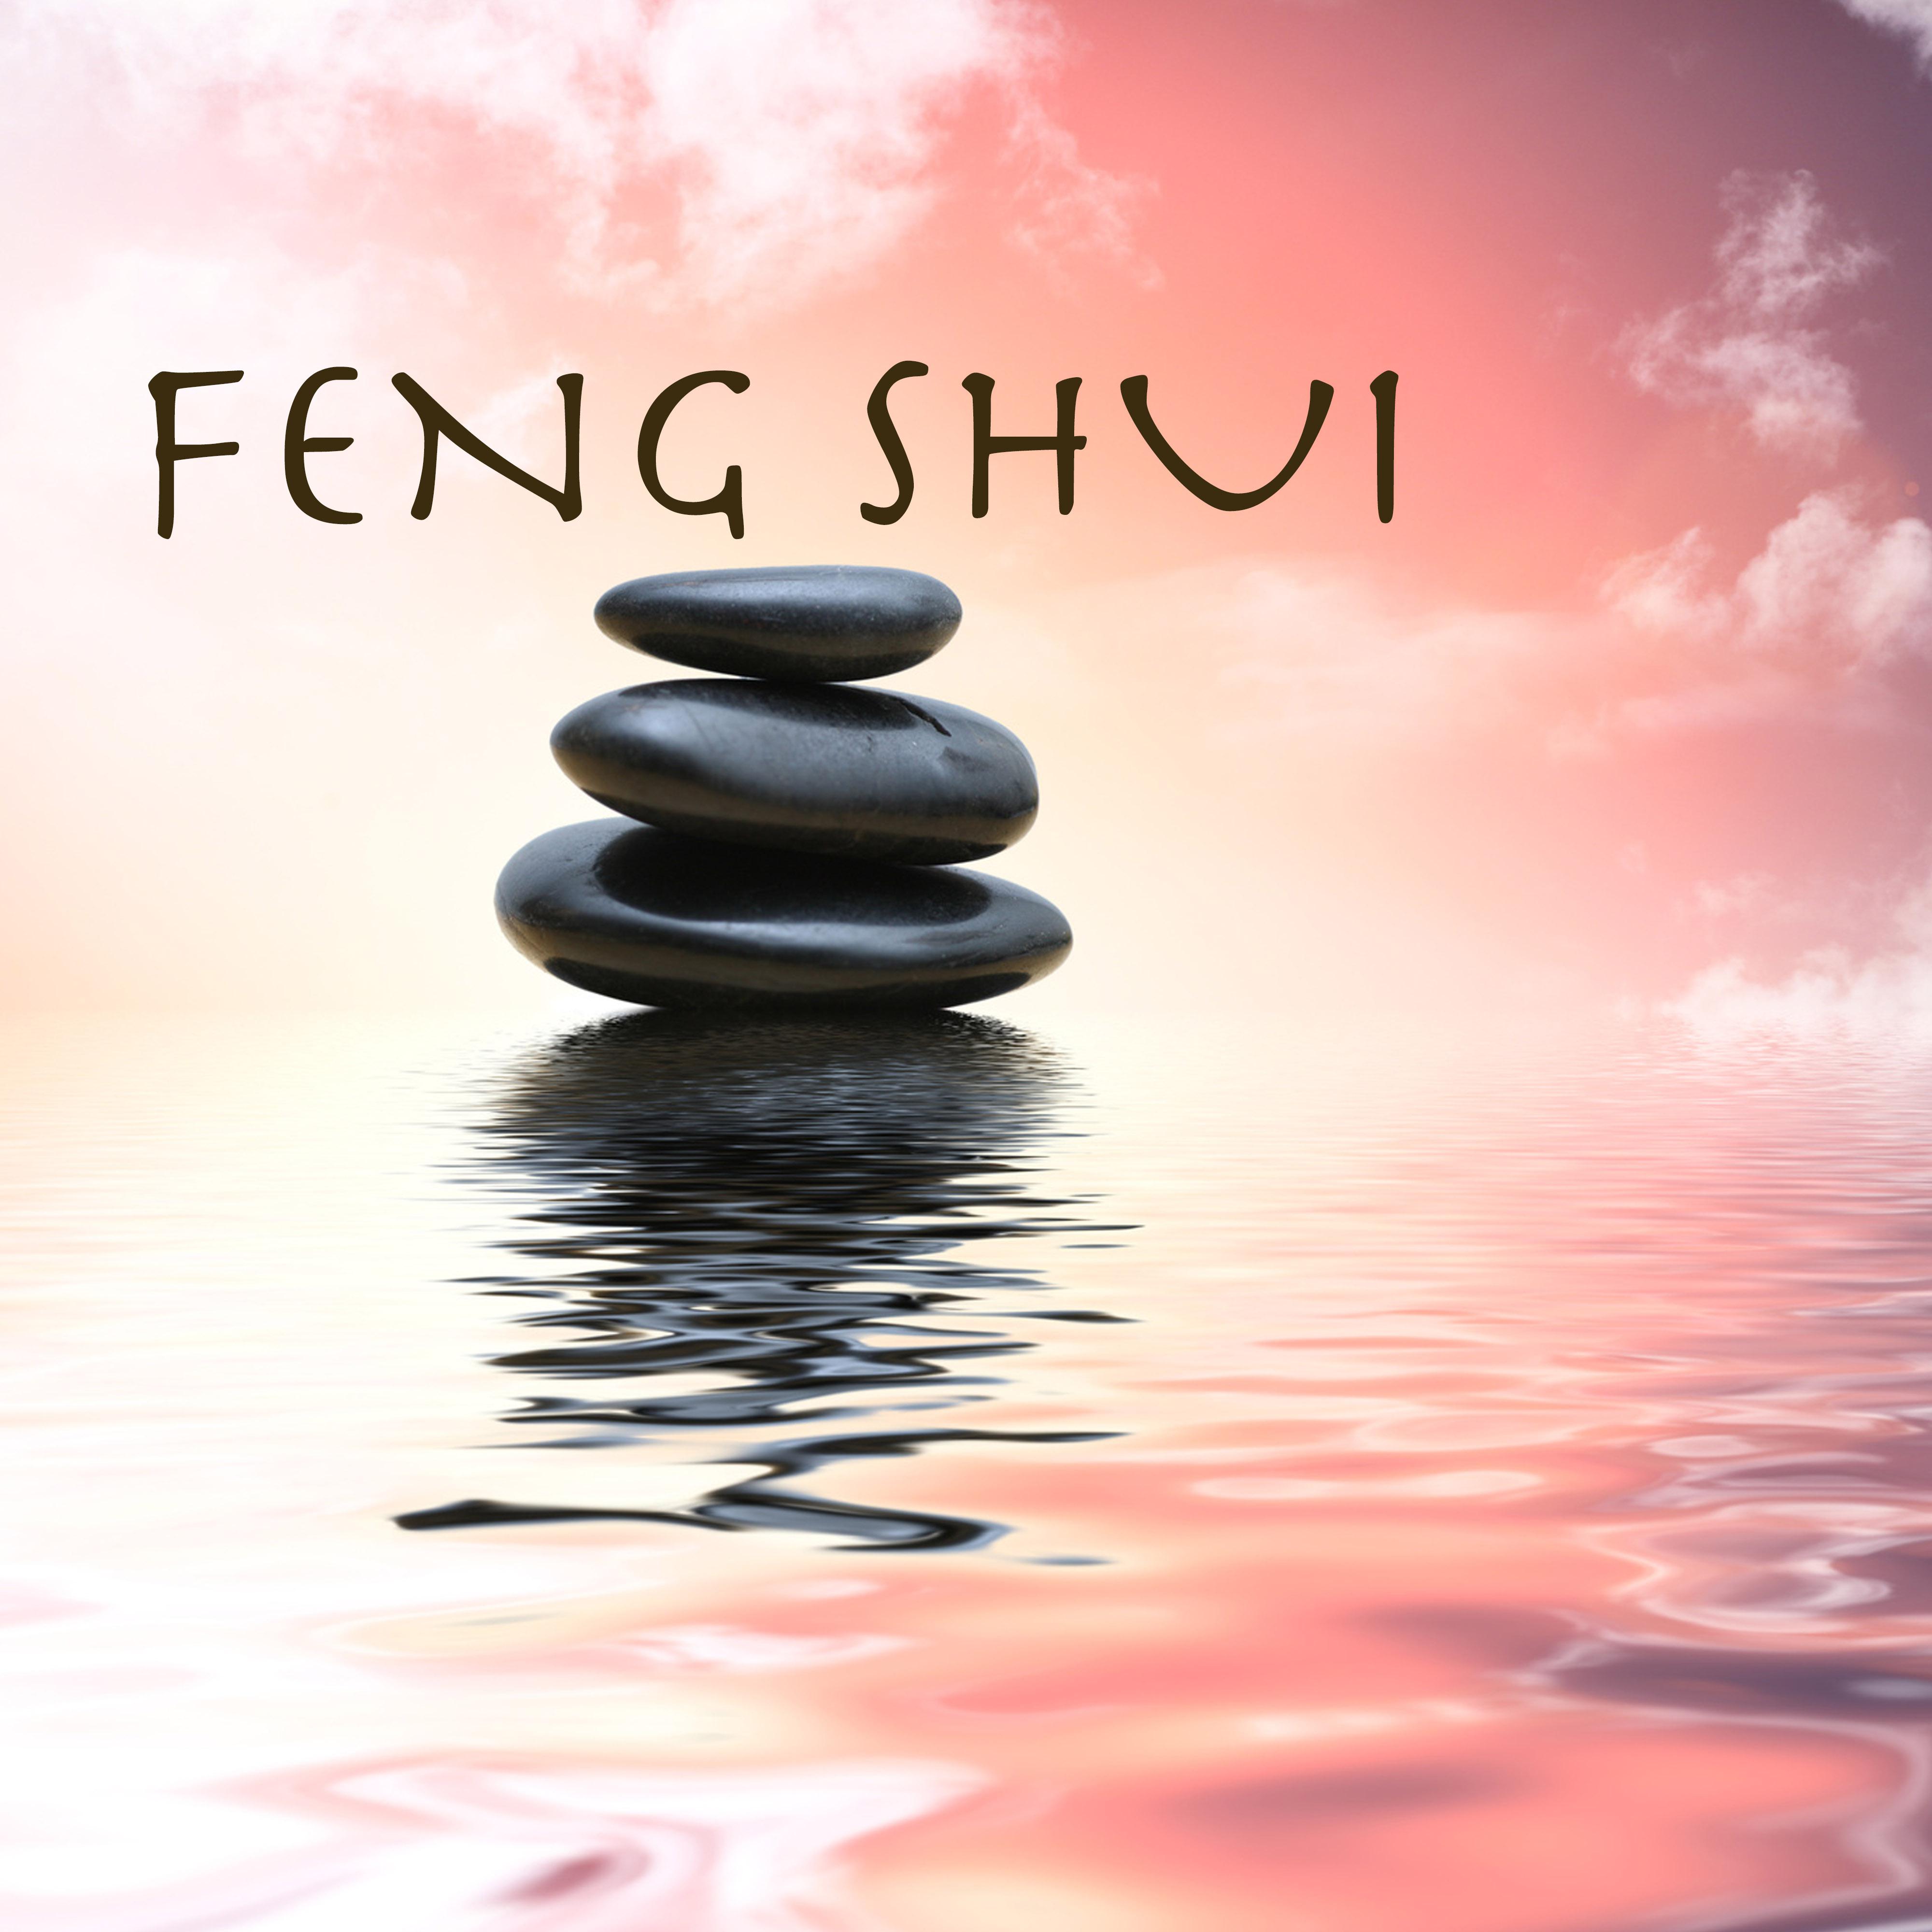 Feng Shui: Serenity Healing Music and Relaxing Songs for Therapy, Wellness, Relax and Fengshui Meditation